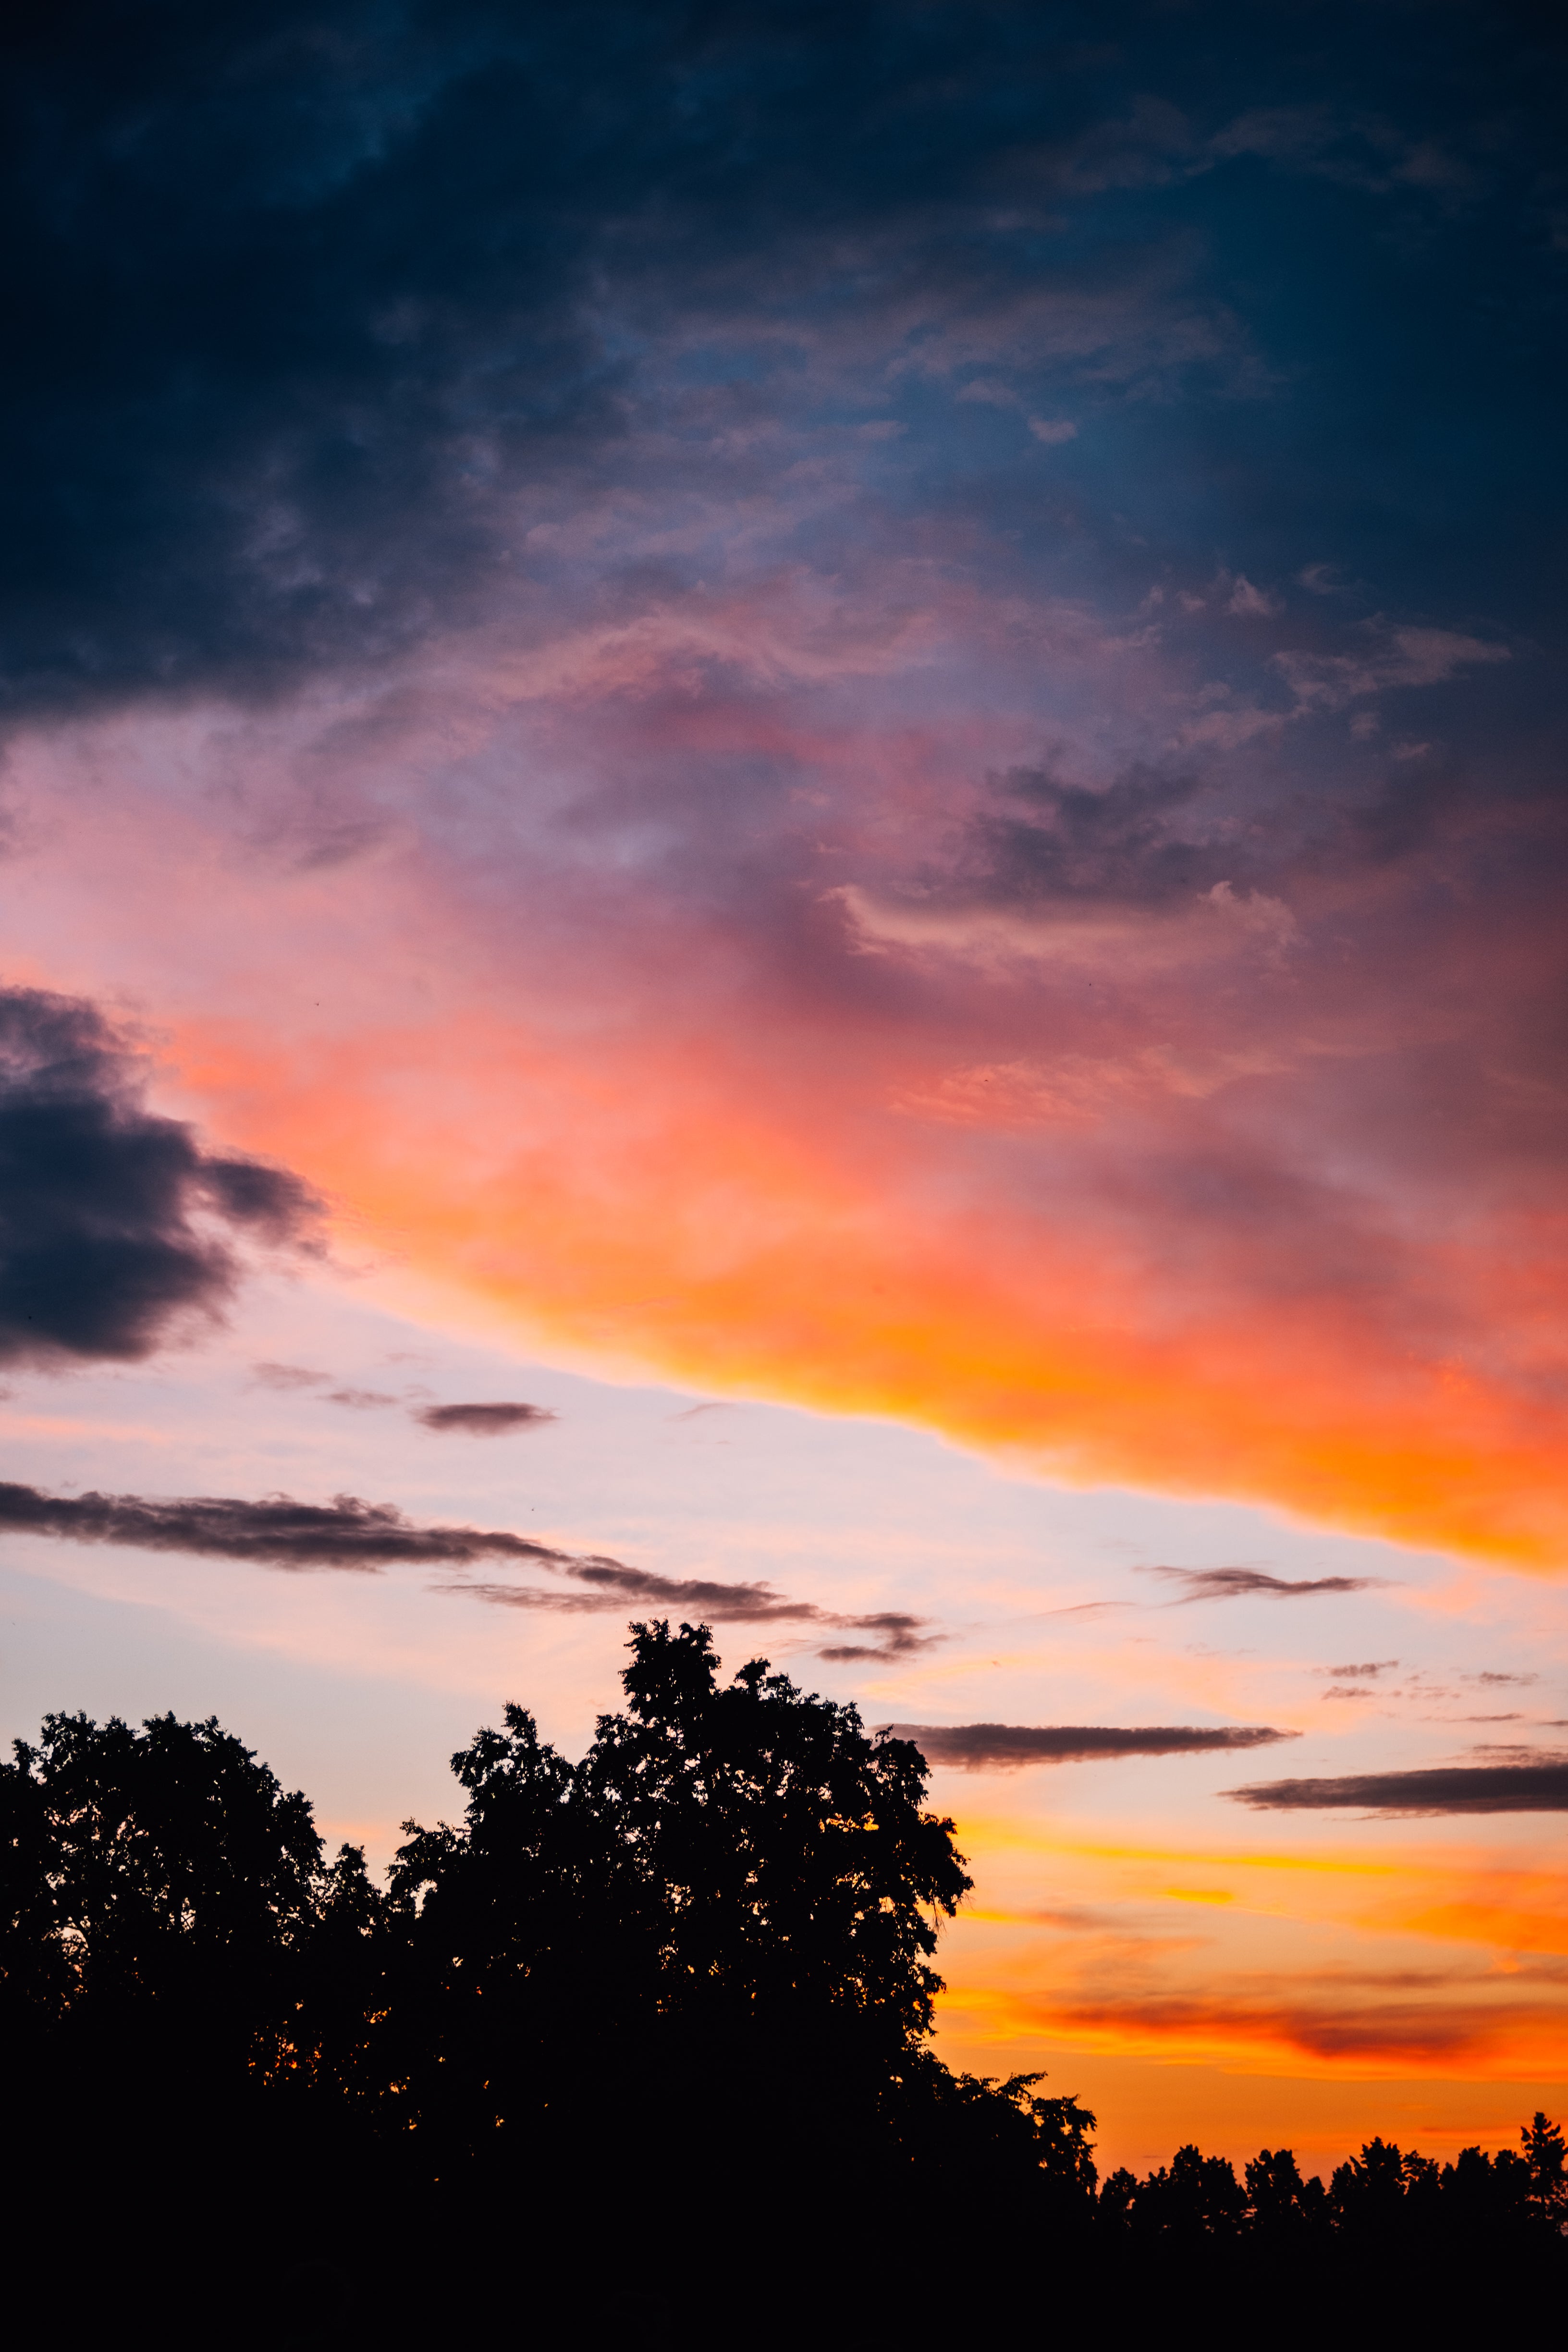 Browse Free HD Images of Sunset Creates Colorful Sky Over Trees